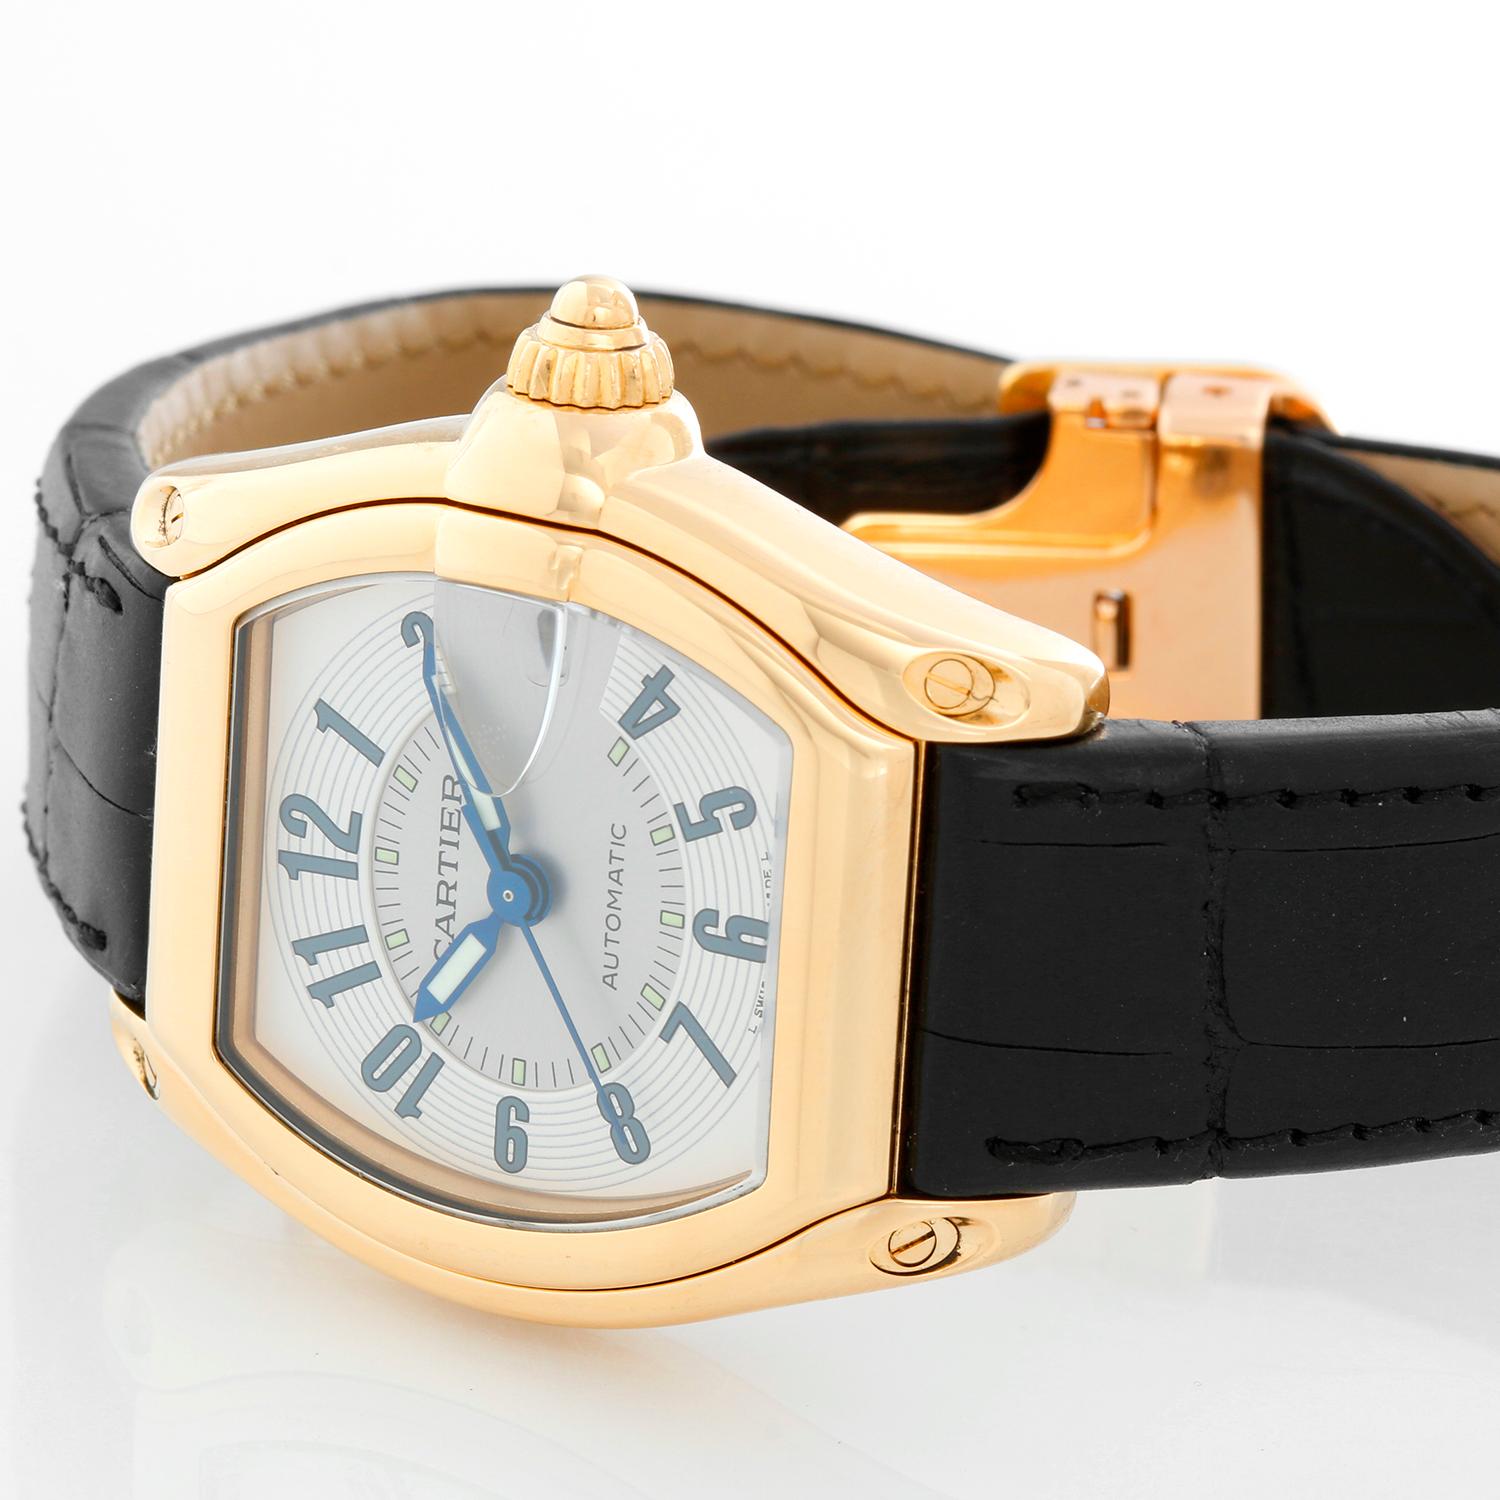 Cartier Roadster 18k Yellow Gold Men's Watch - Automatic winding with date at 3 o'clock . 18k yellow gold case (37mm x 44mm). Silver guilloche dial with black Arabic numerals. Black strap with 18K Yellow gold Cartier deployant clasp. Pre-owned with